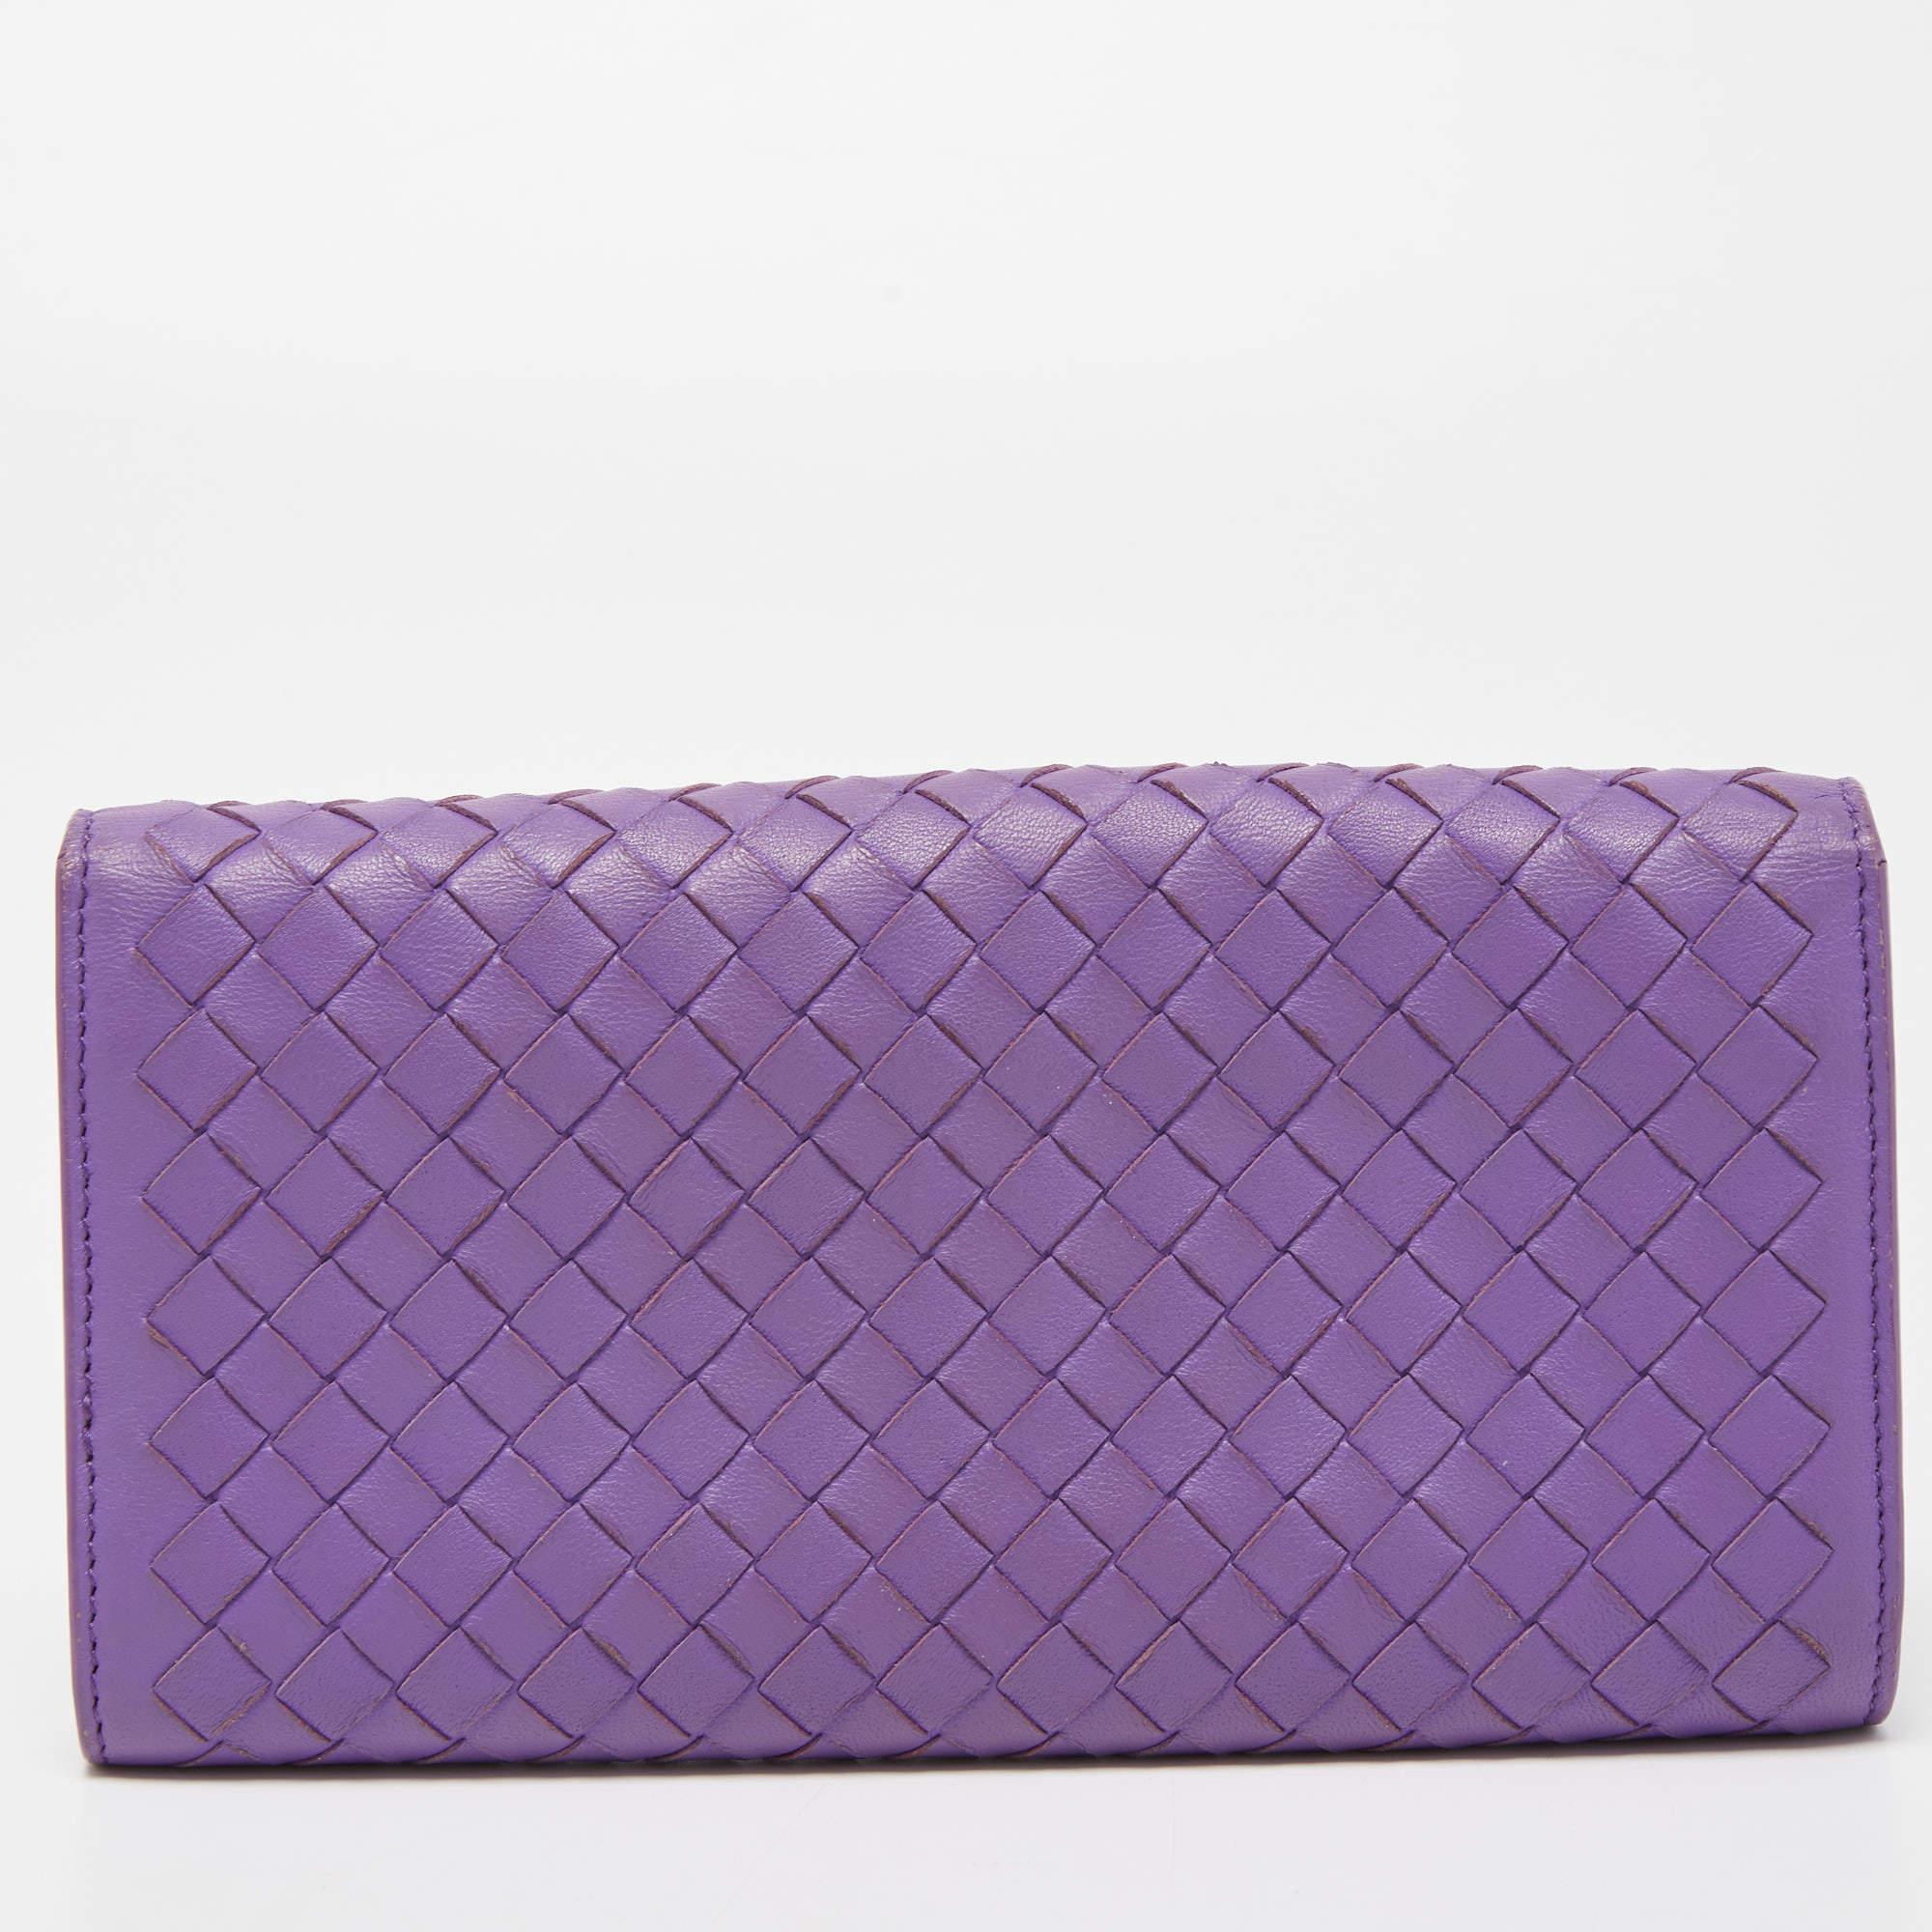 Featuring brand's signature Intrecciato pattern, this Bottega Veneta wallet is sempiternal. It is crafted from leather and equipped with a flap closure, black-tone hardware, and leather lining. The different interior compartments are divided neatly